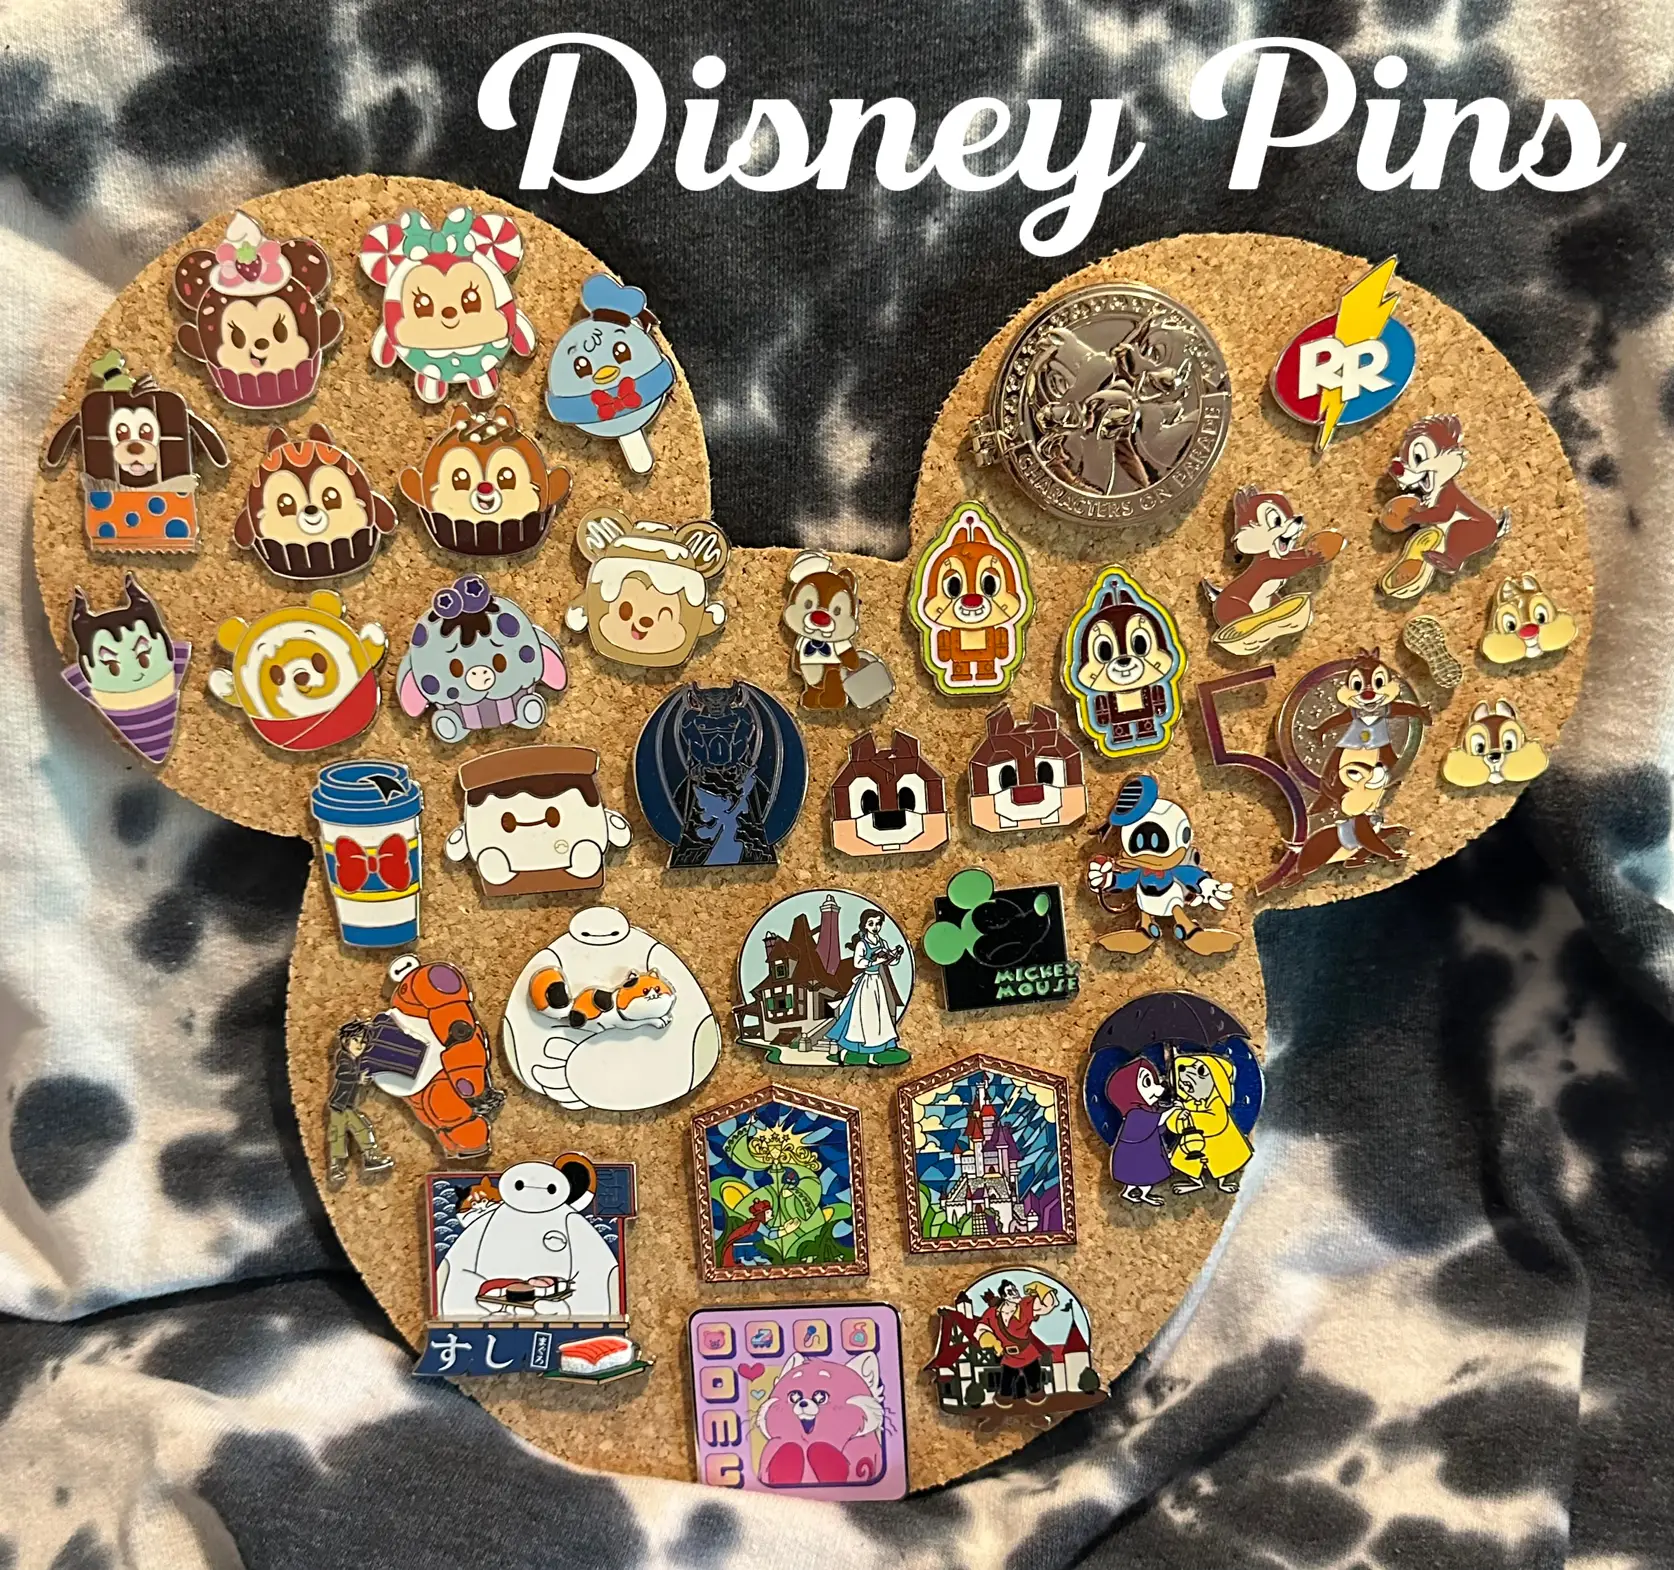 Disney Pins, Gallery posted by Lady Echo